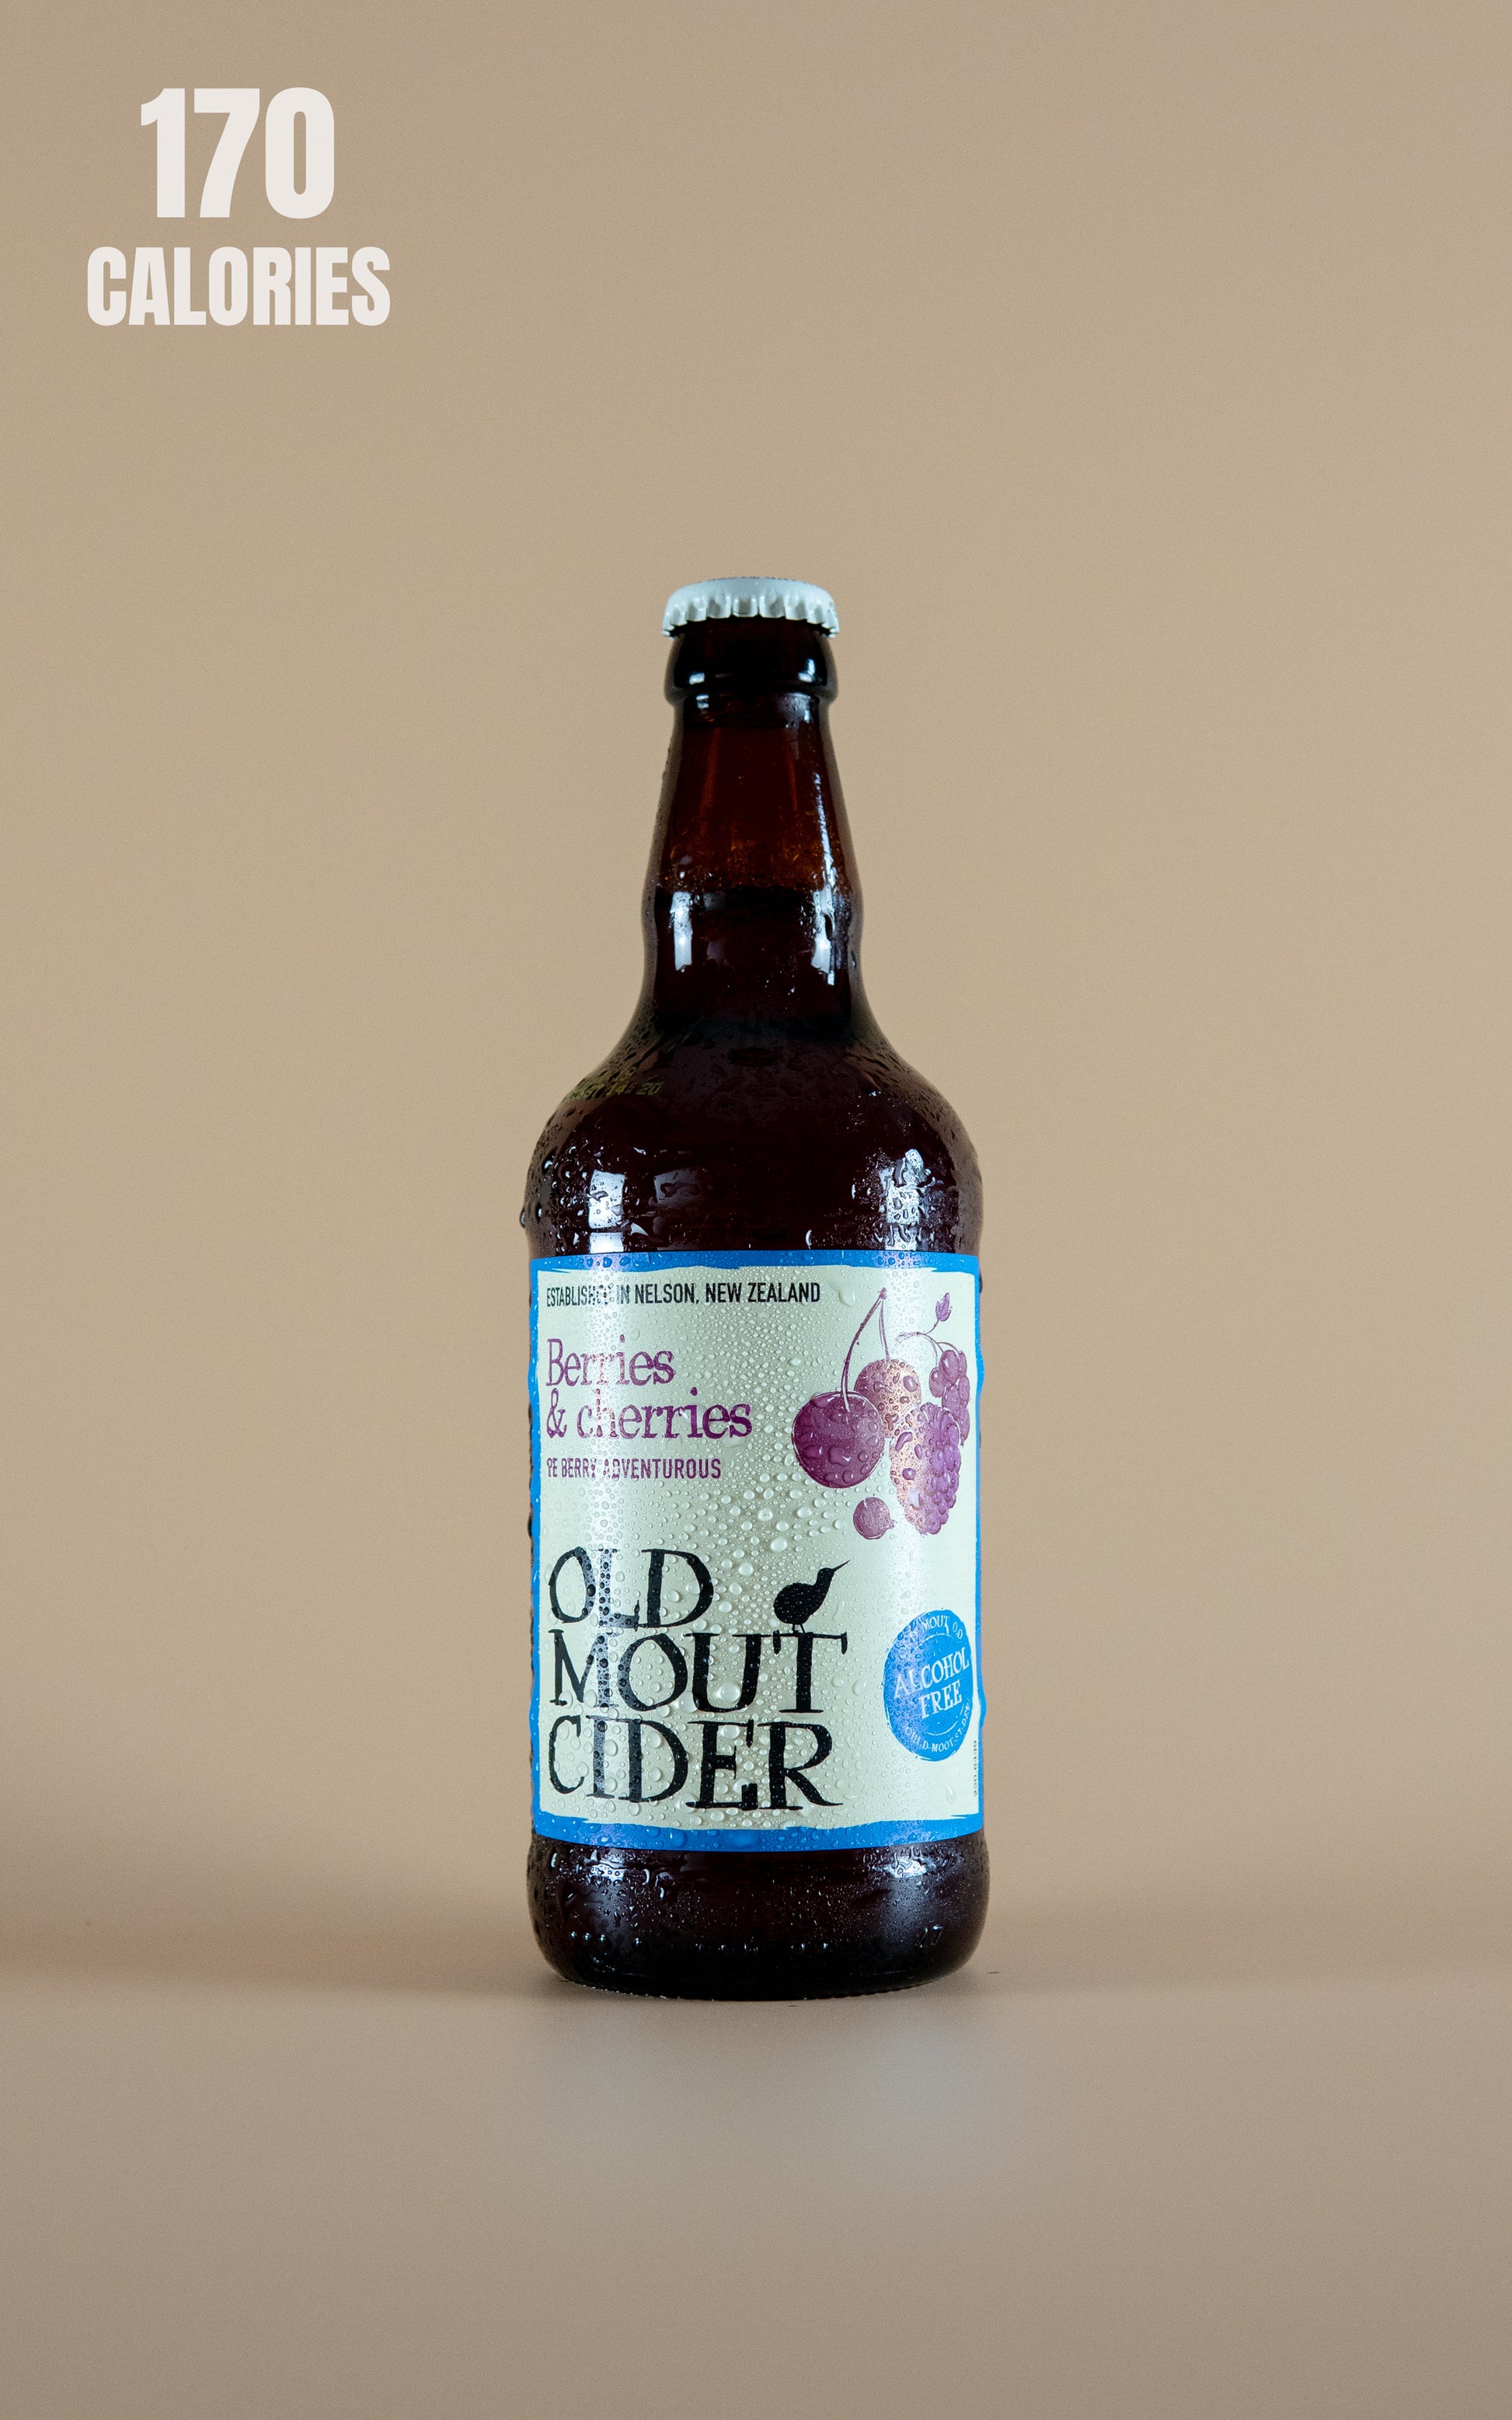 LightDrinks - Old Mout Cider Berries & Cherries Alcohol Free - 500ml